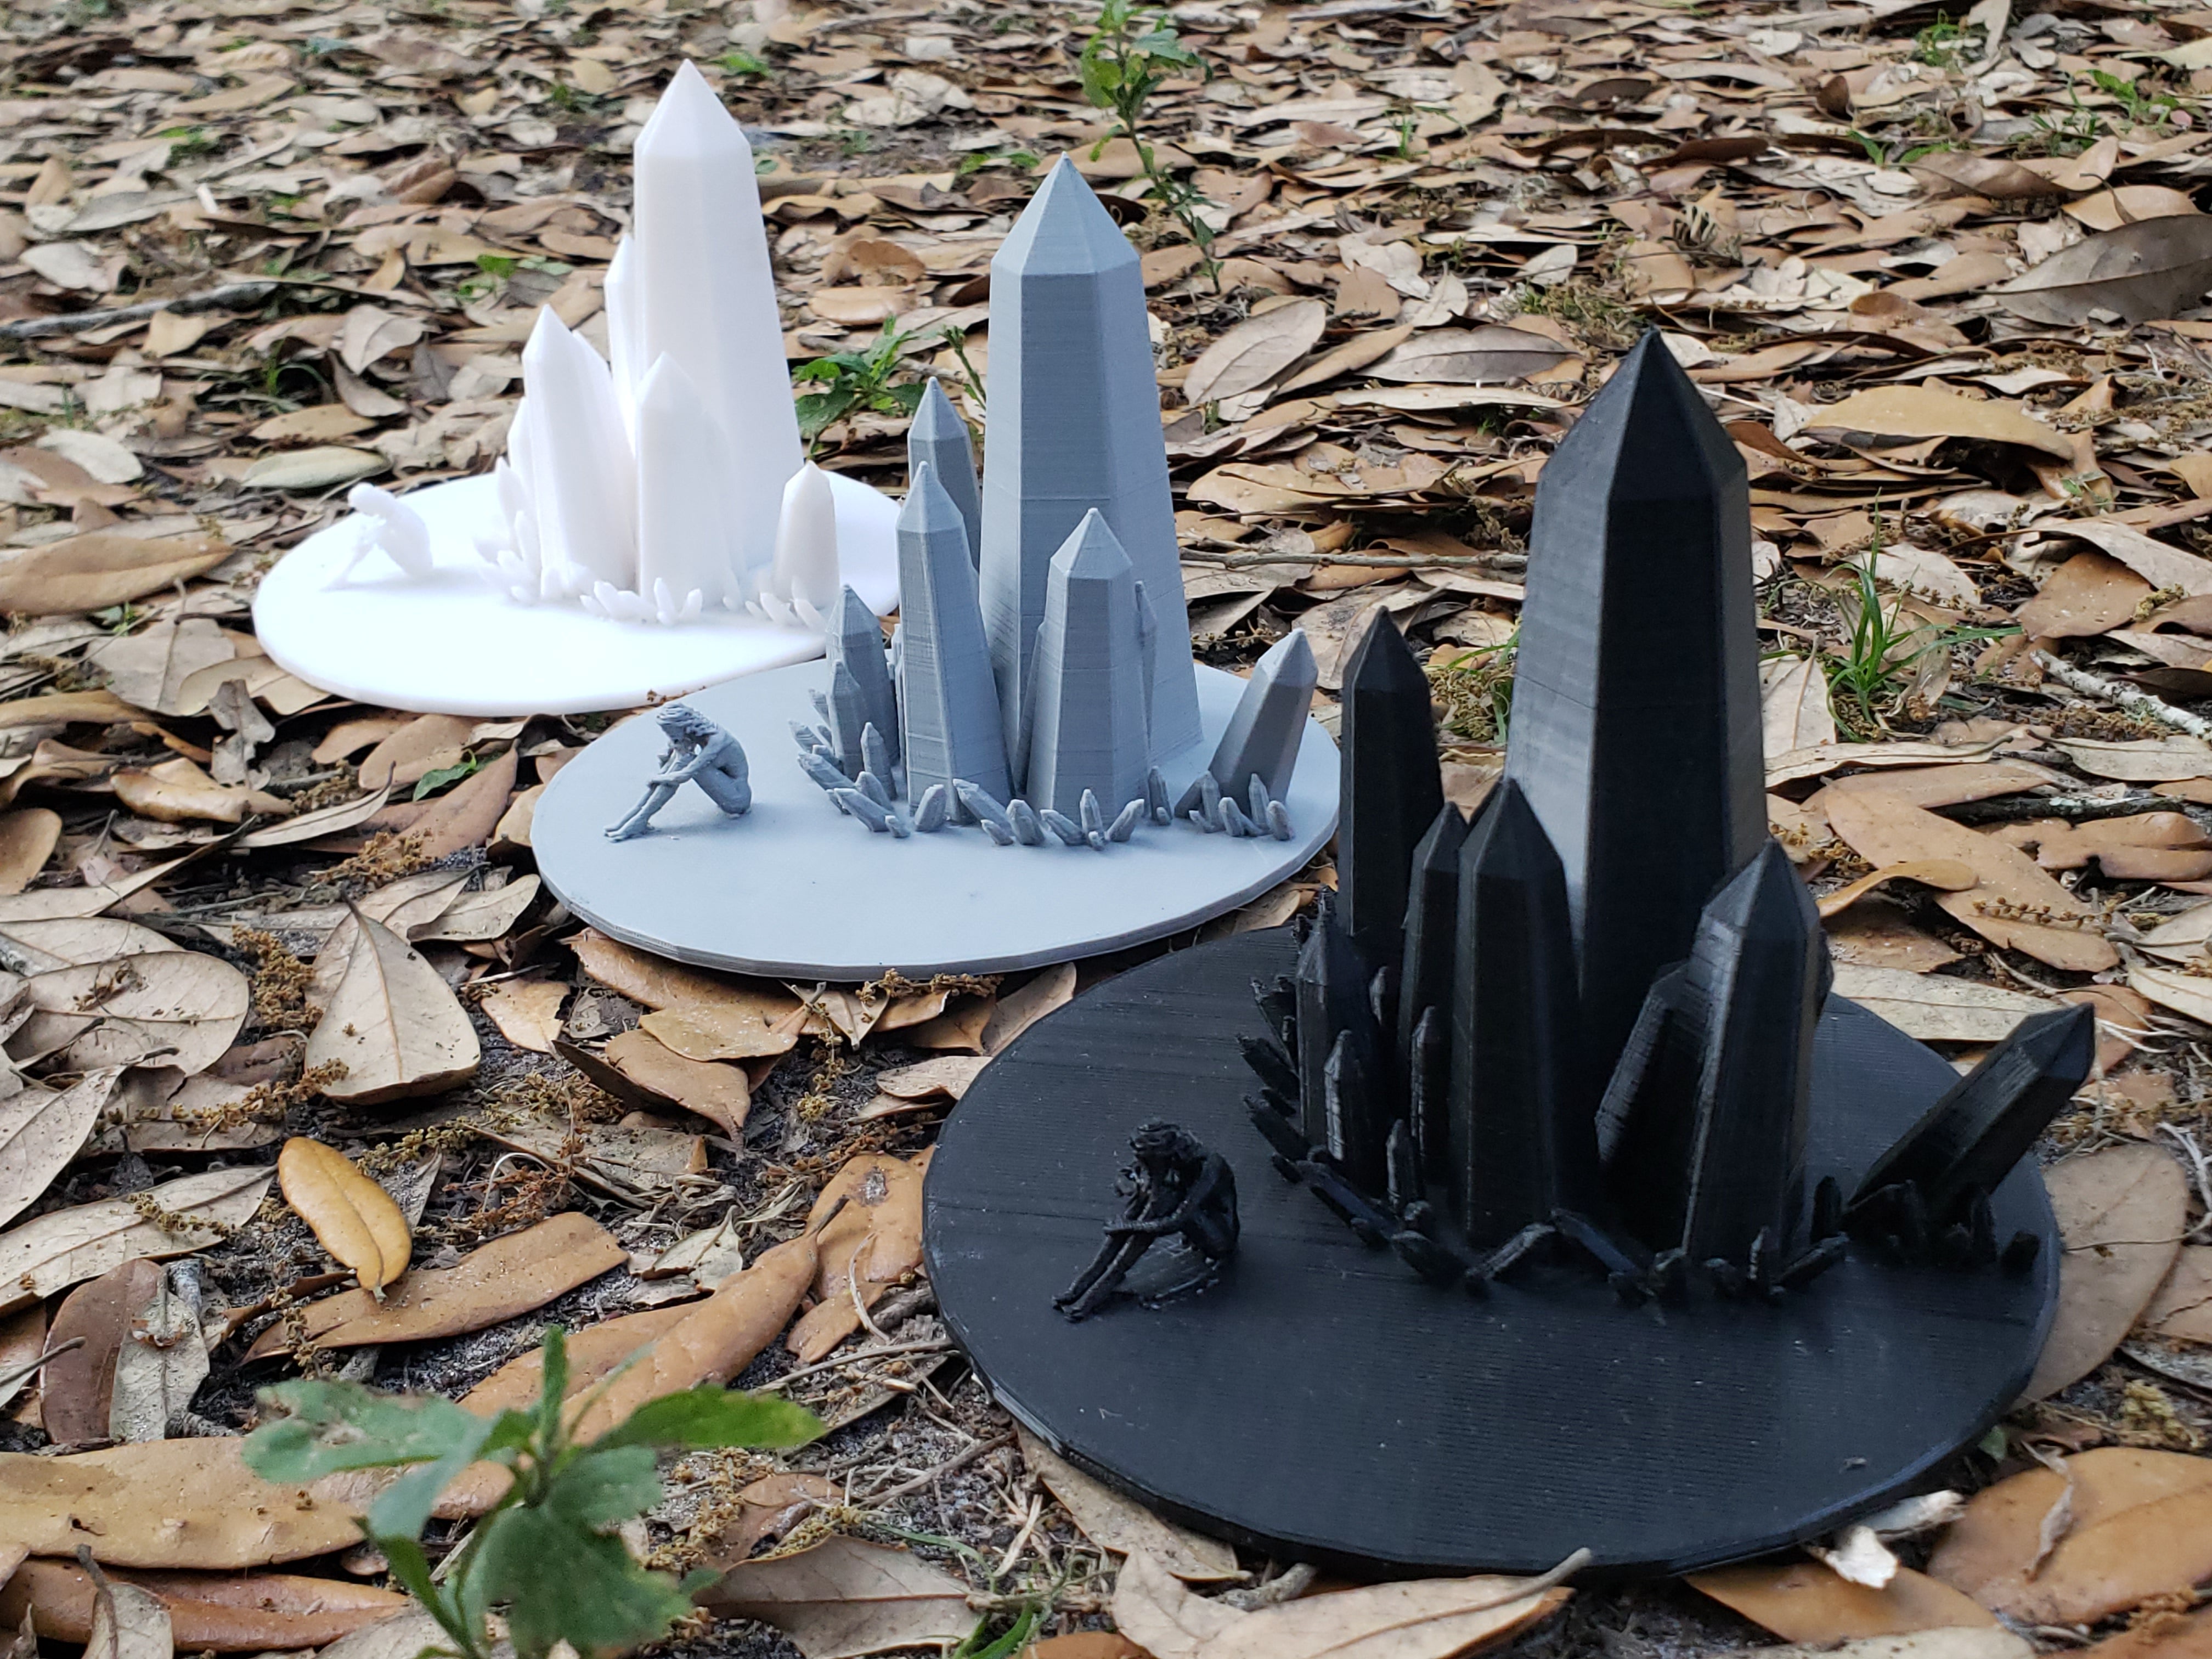 3D Print - To Shed Light or Cast Shadows